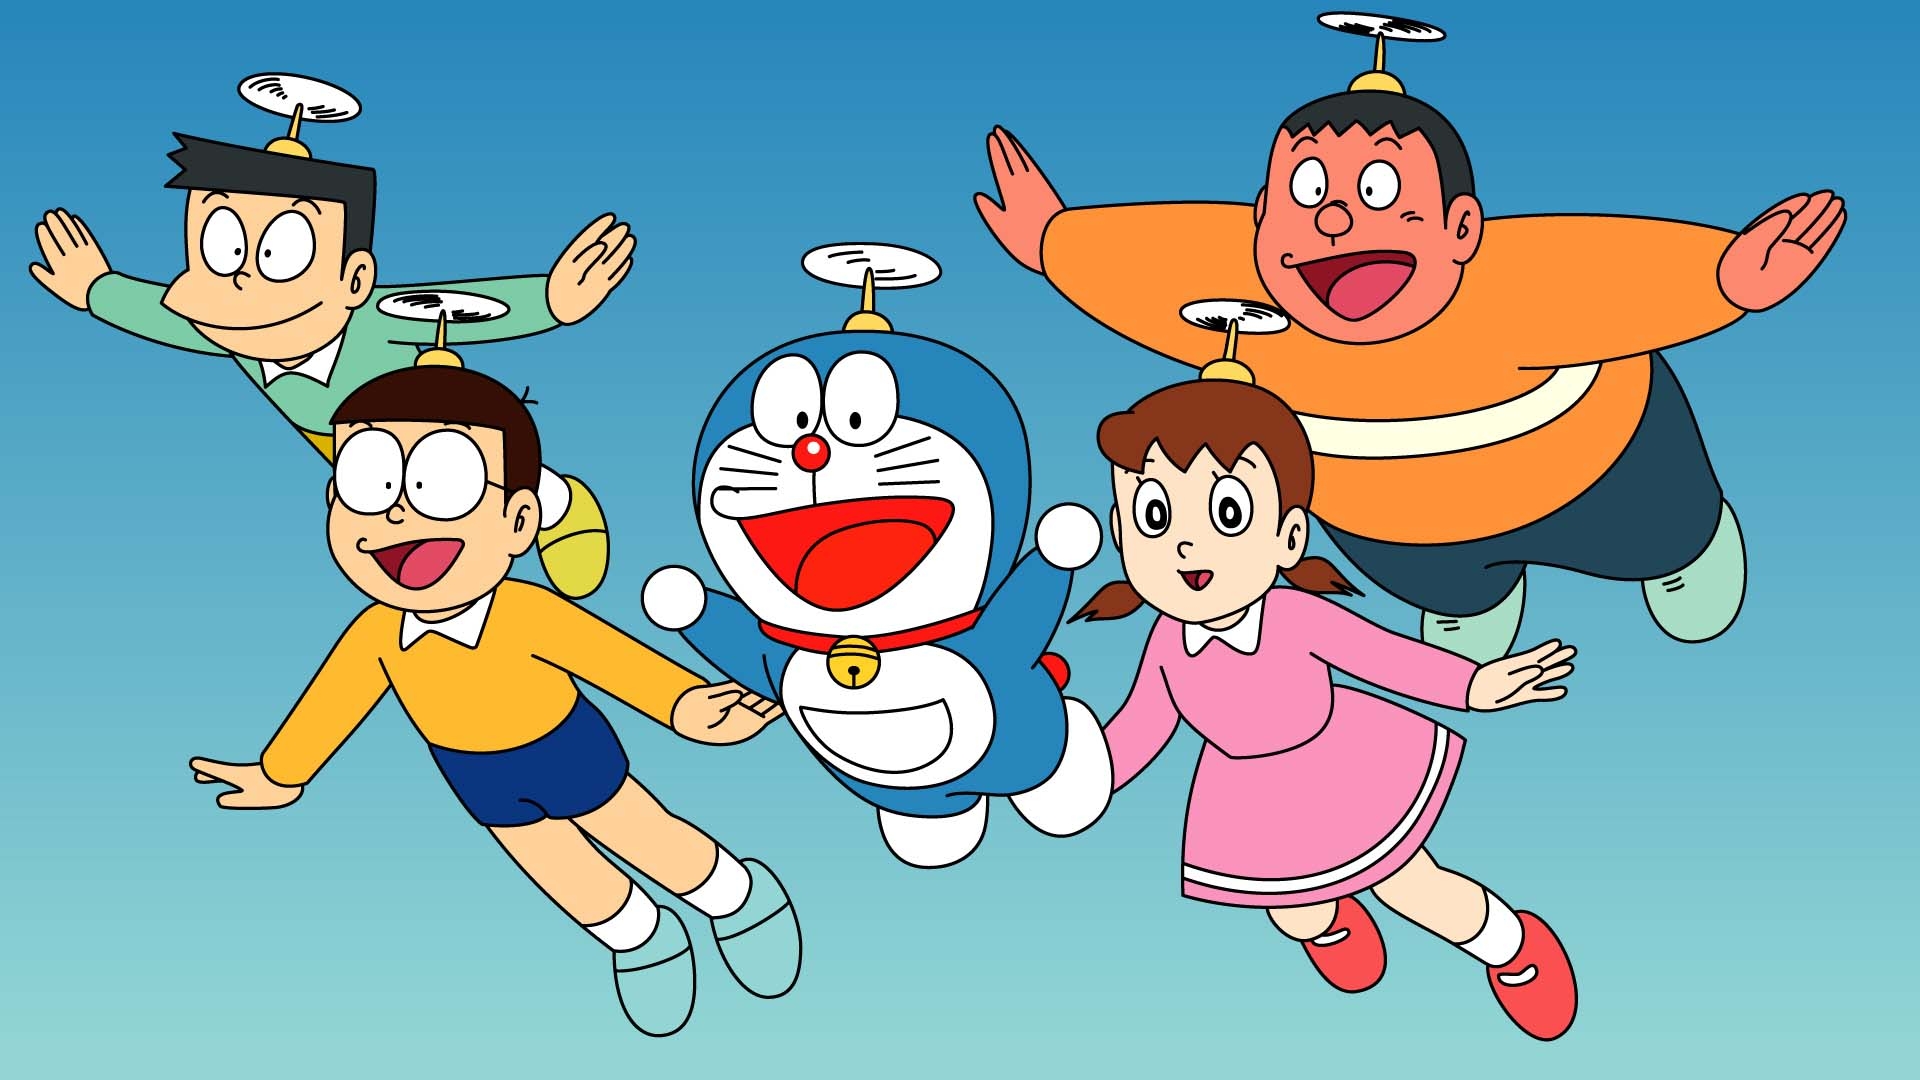 Doraemon Drawing - Get Coloring Pages